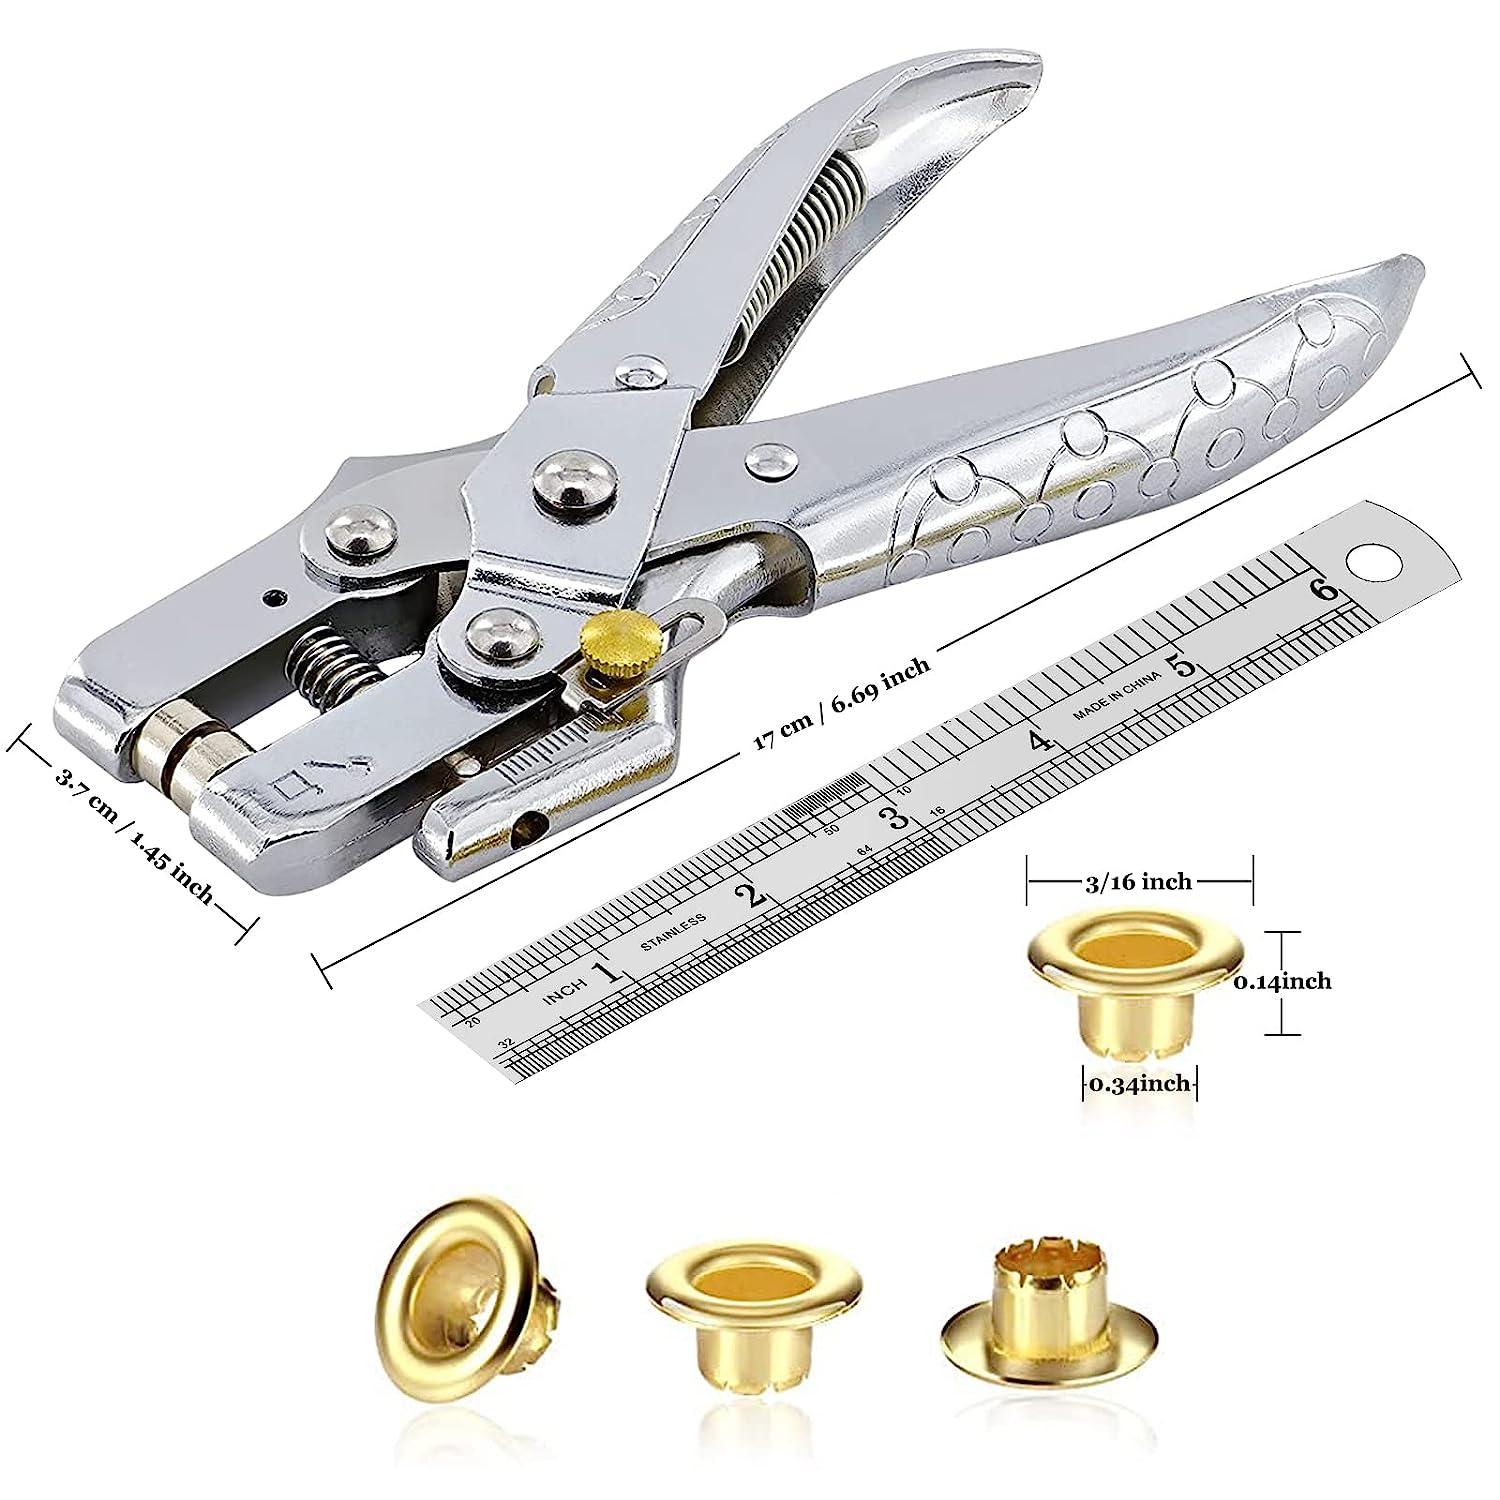 POUPHY Hole Punch Tool, Eyelet Hole Puncher Kits with 3/16 inch 200 Pcs  Gold & Silver Metal Grommets for Leather Fabric Belt Clothes Card Paper  Canvas Decorative Repair